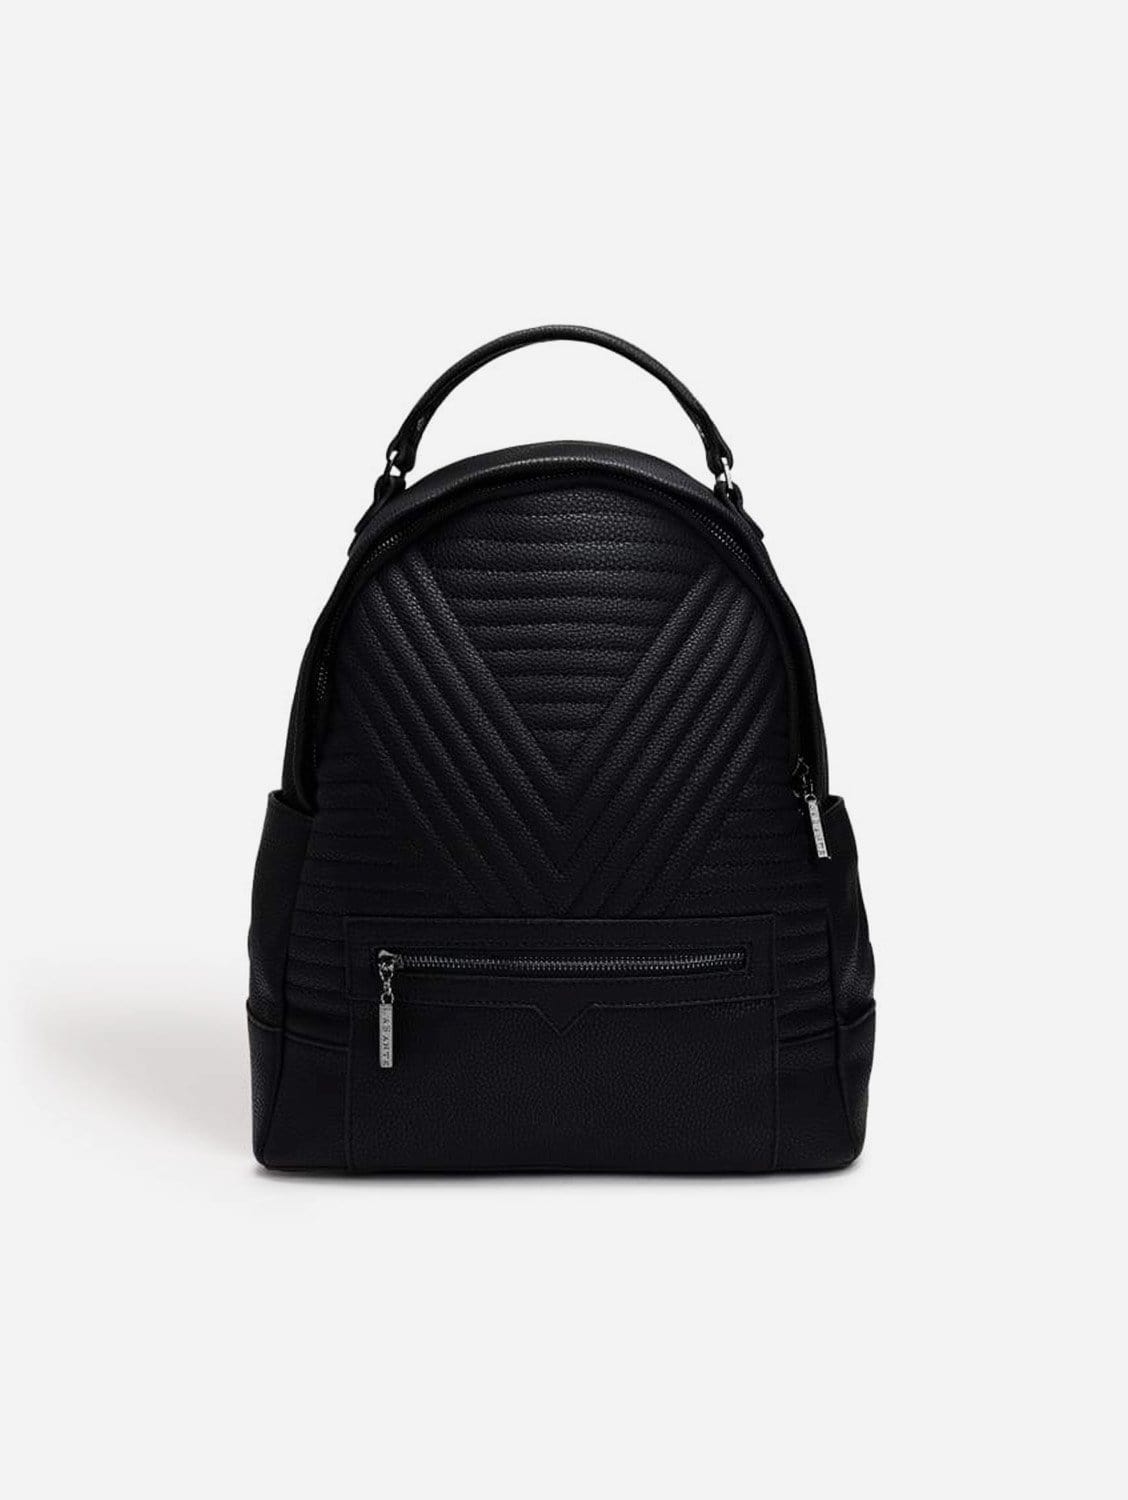 Parisian Ladies' Ulissa Quilted Backpack in Black